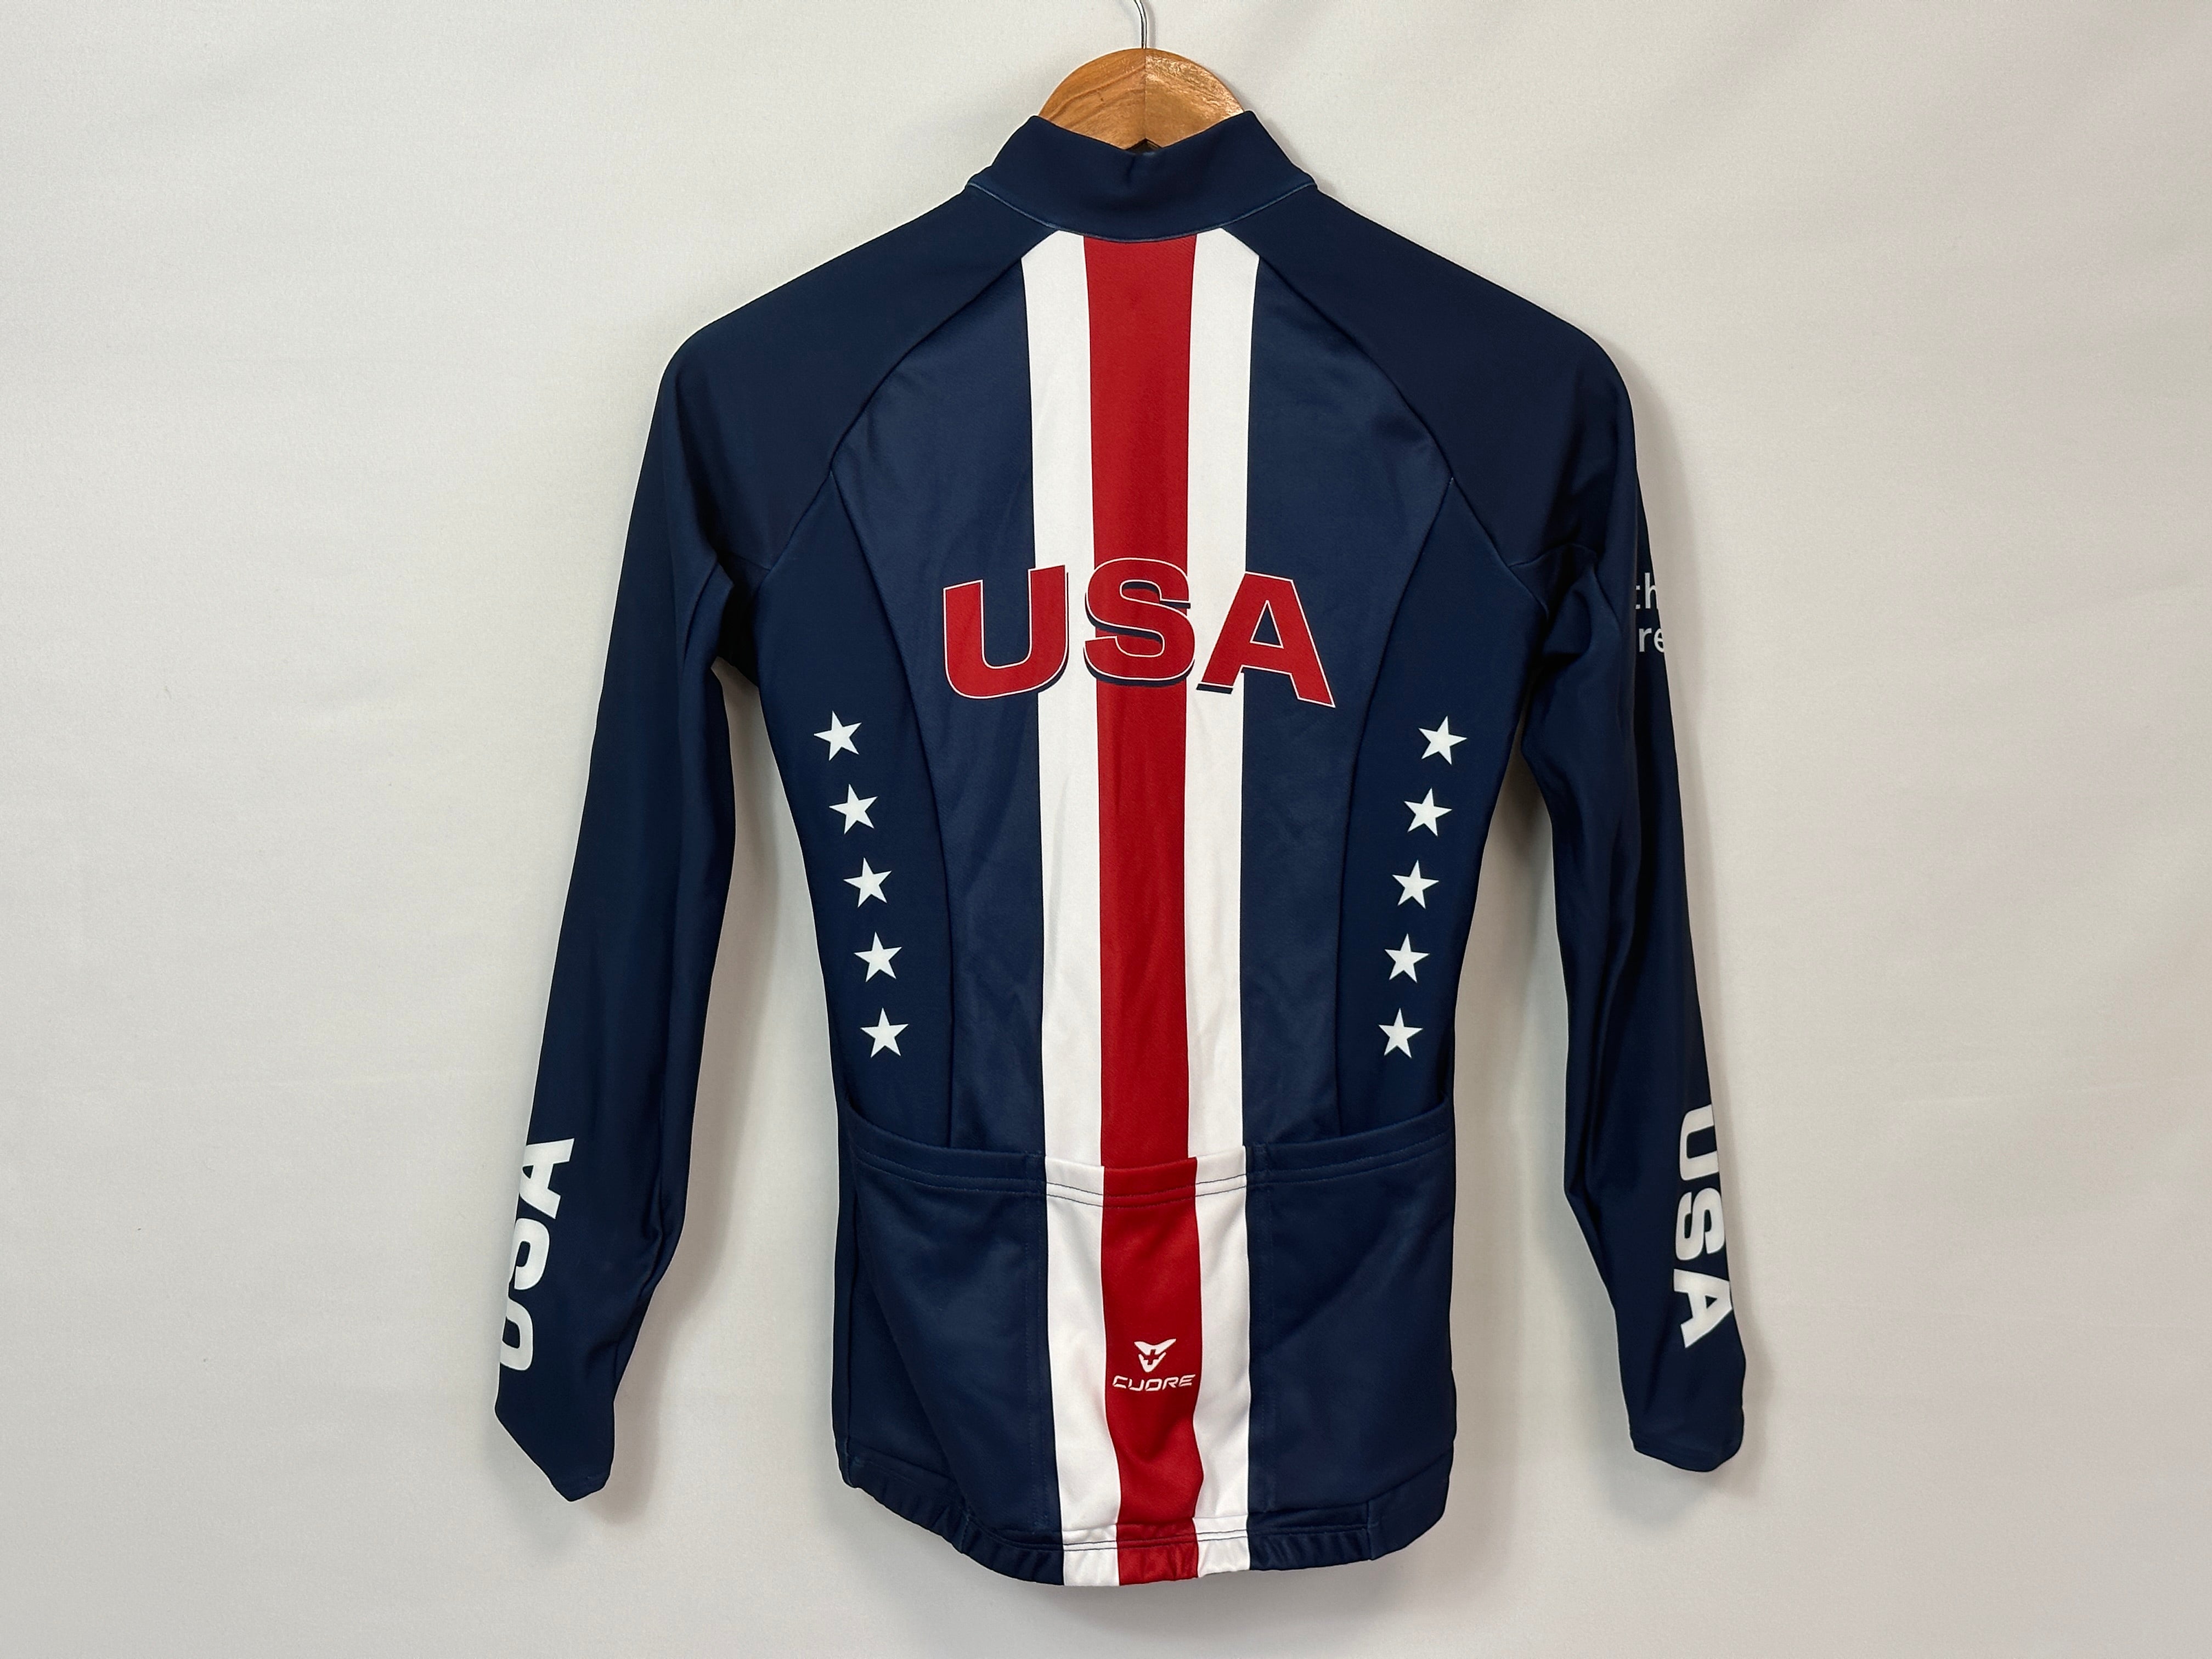 USA National Cycling Team - Thermal Jersey by Cuore